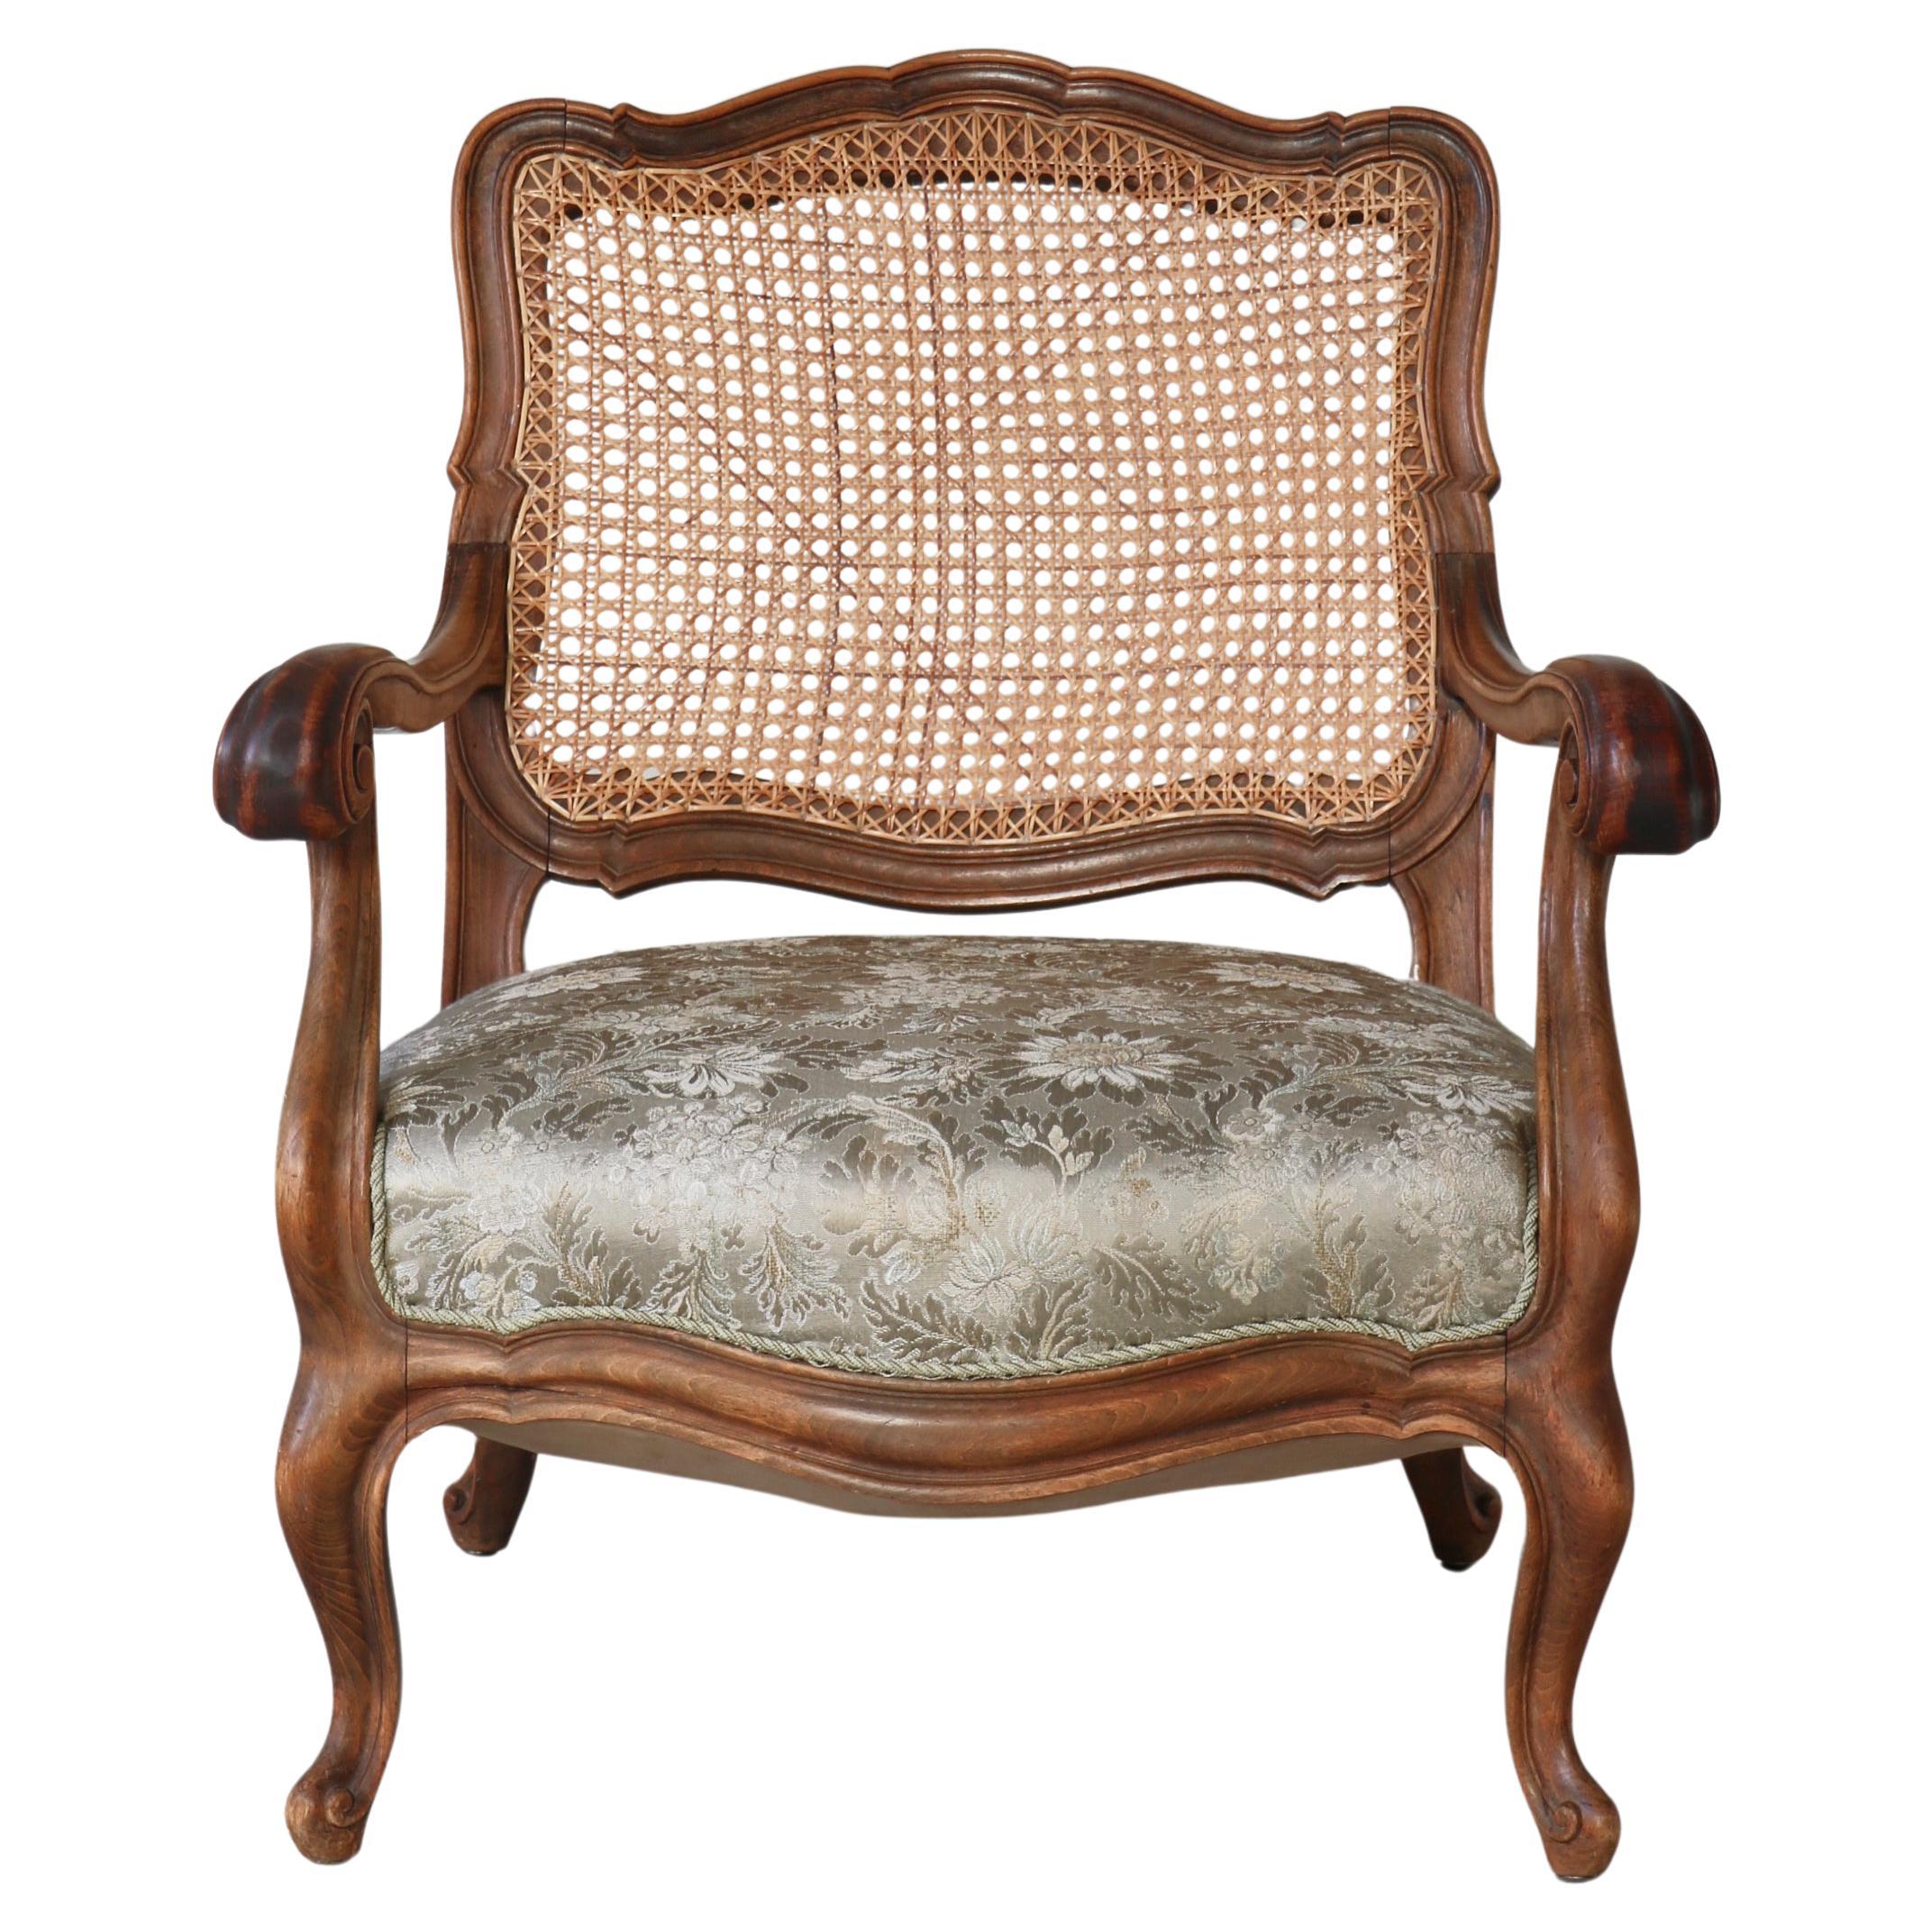 Bergére Chair Rococo Revival by Danish Cabinetmaker, Early 20th Century